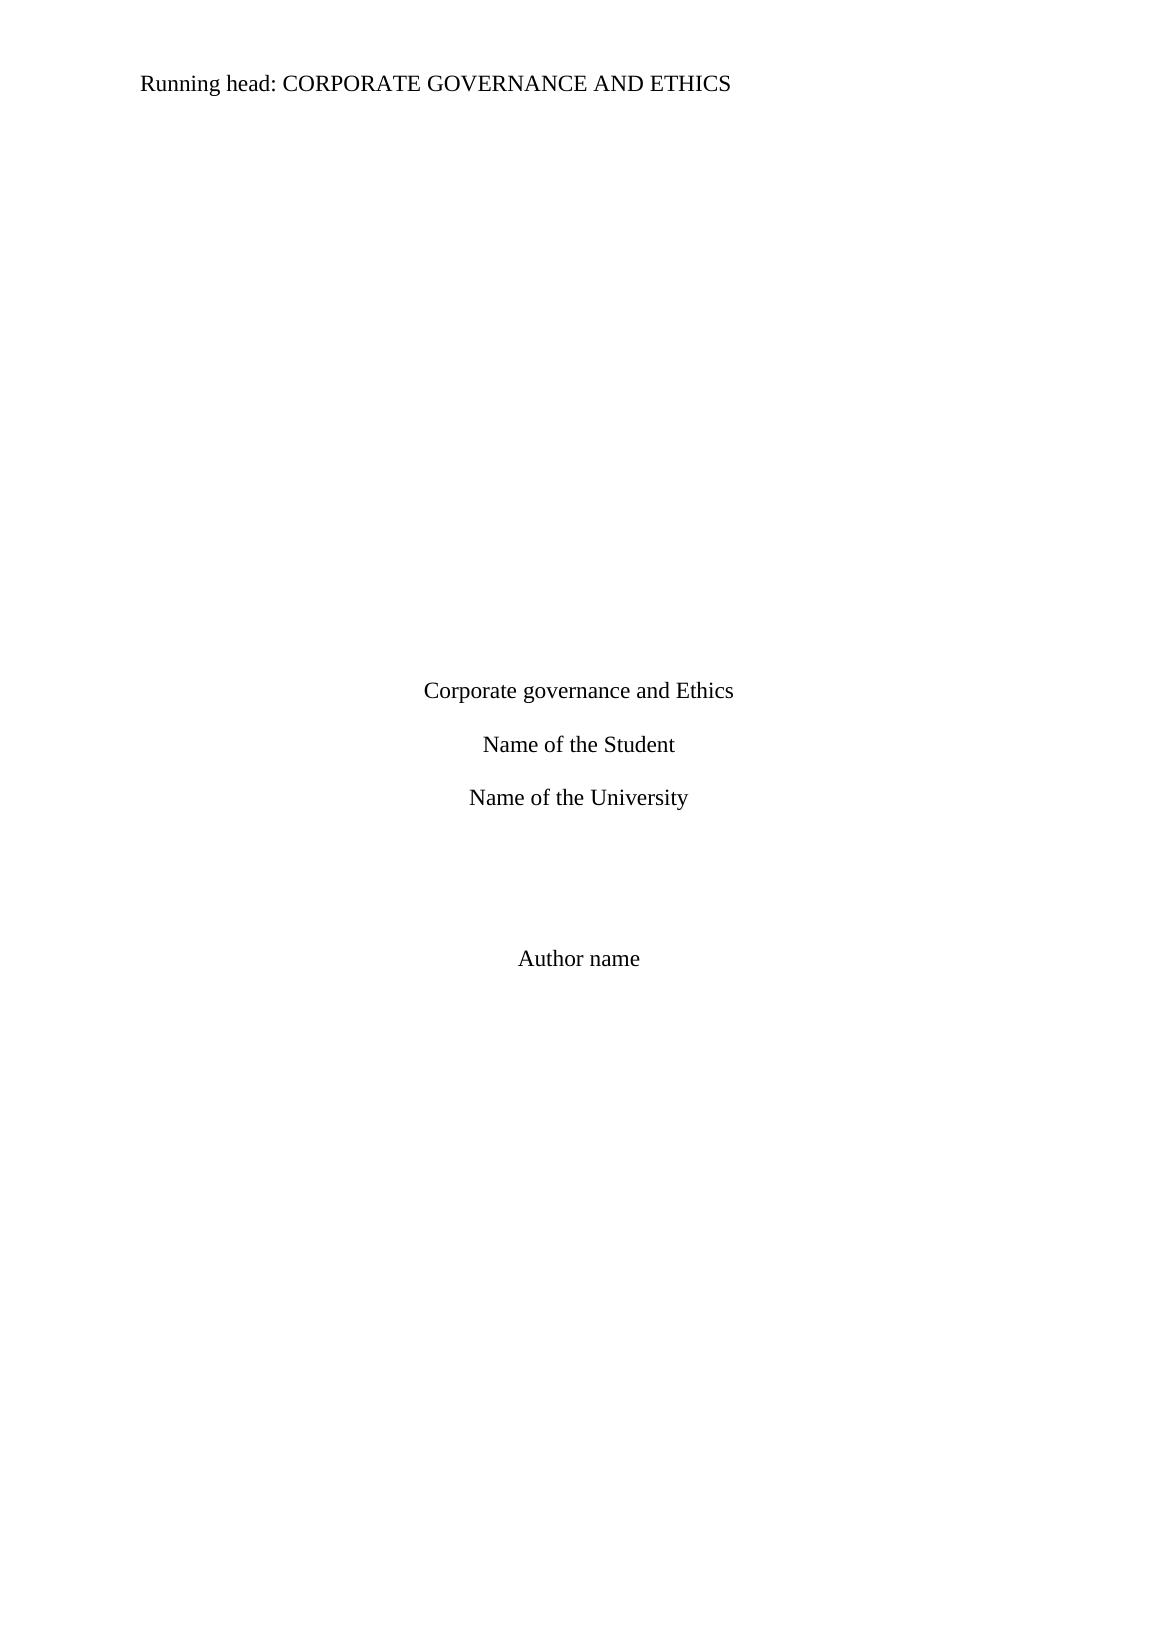 Corporate Governance and Ethics Report_1